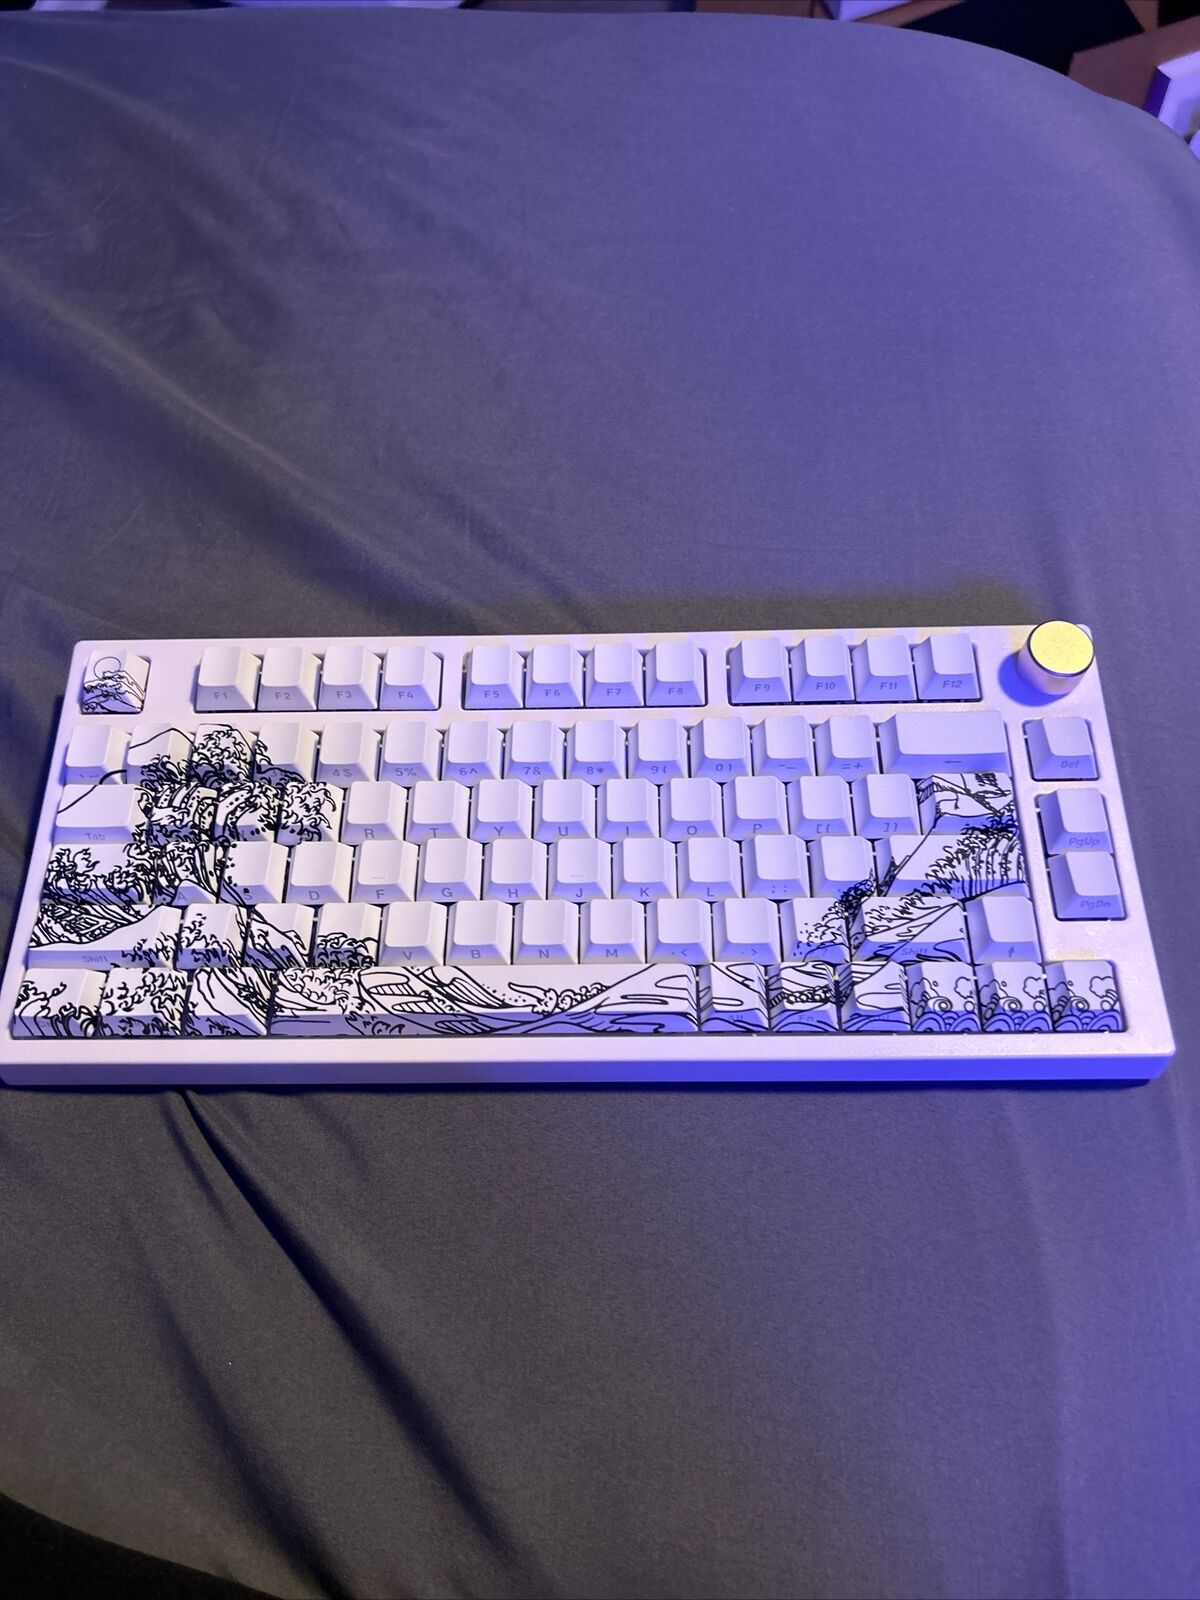 Custom All White  epomaker th80 pro With Akko Lavender Switches